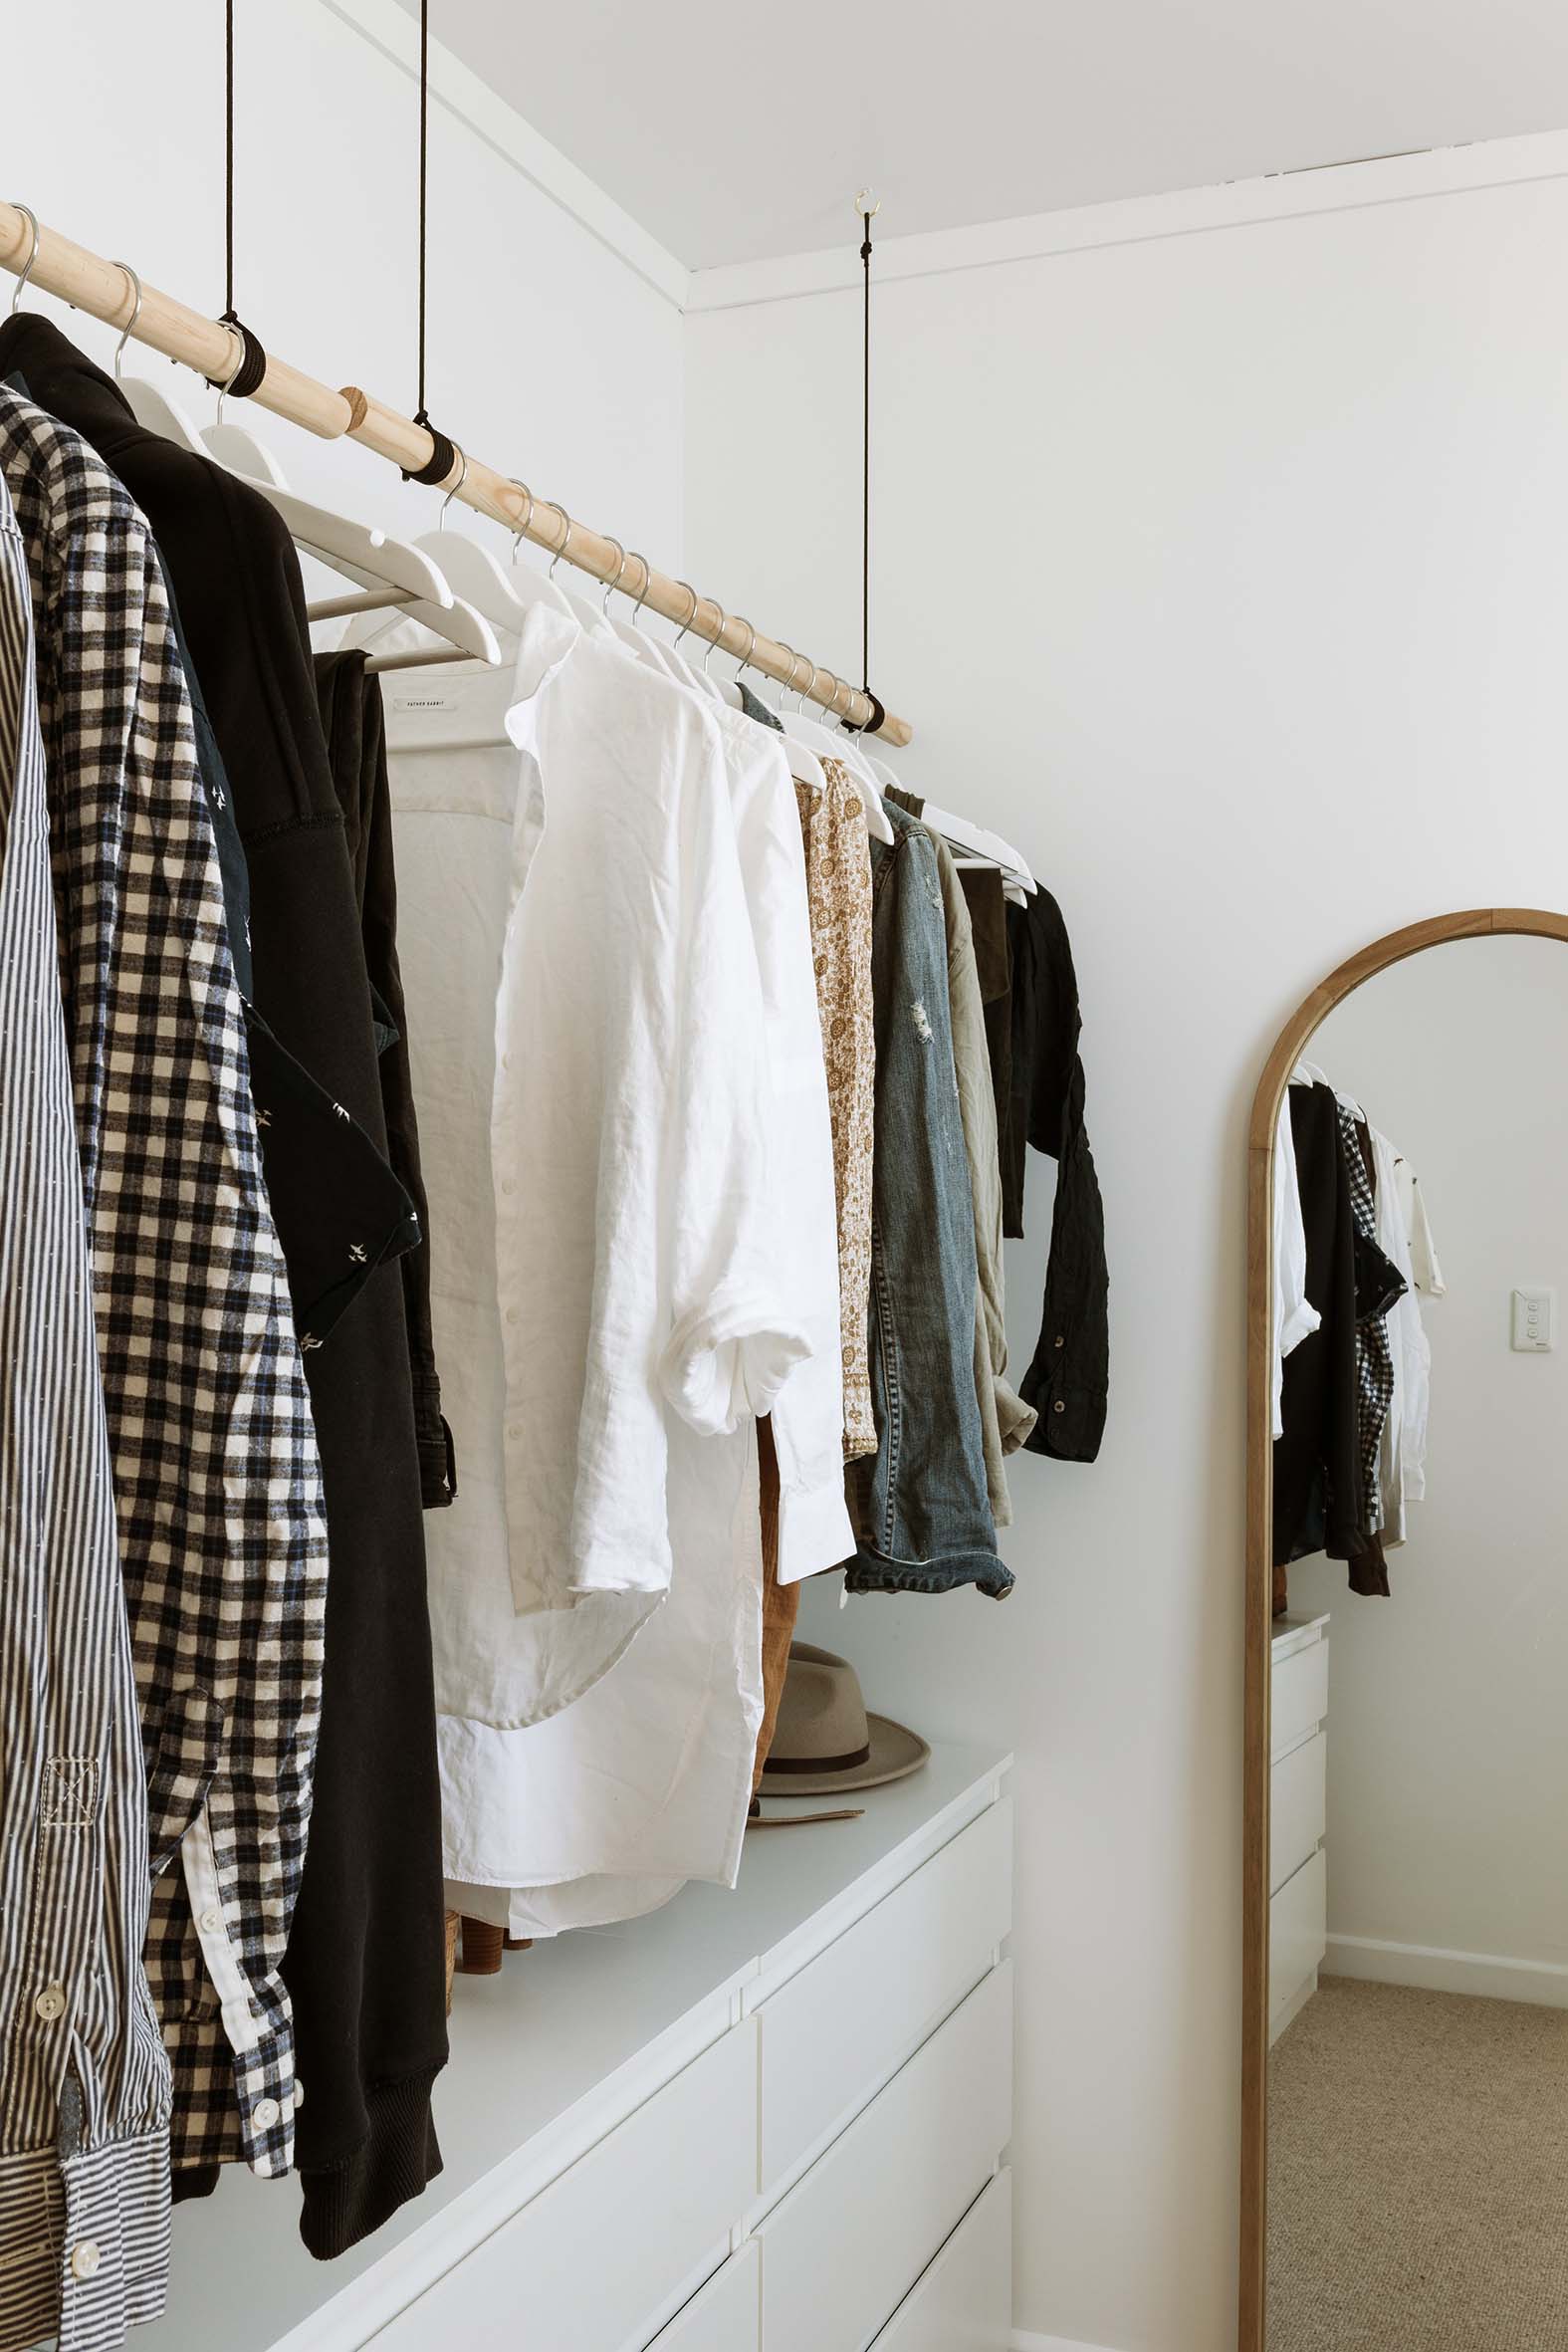 A walk in wardrobe with a large standing mirror and hanging hangers